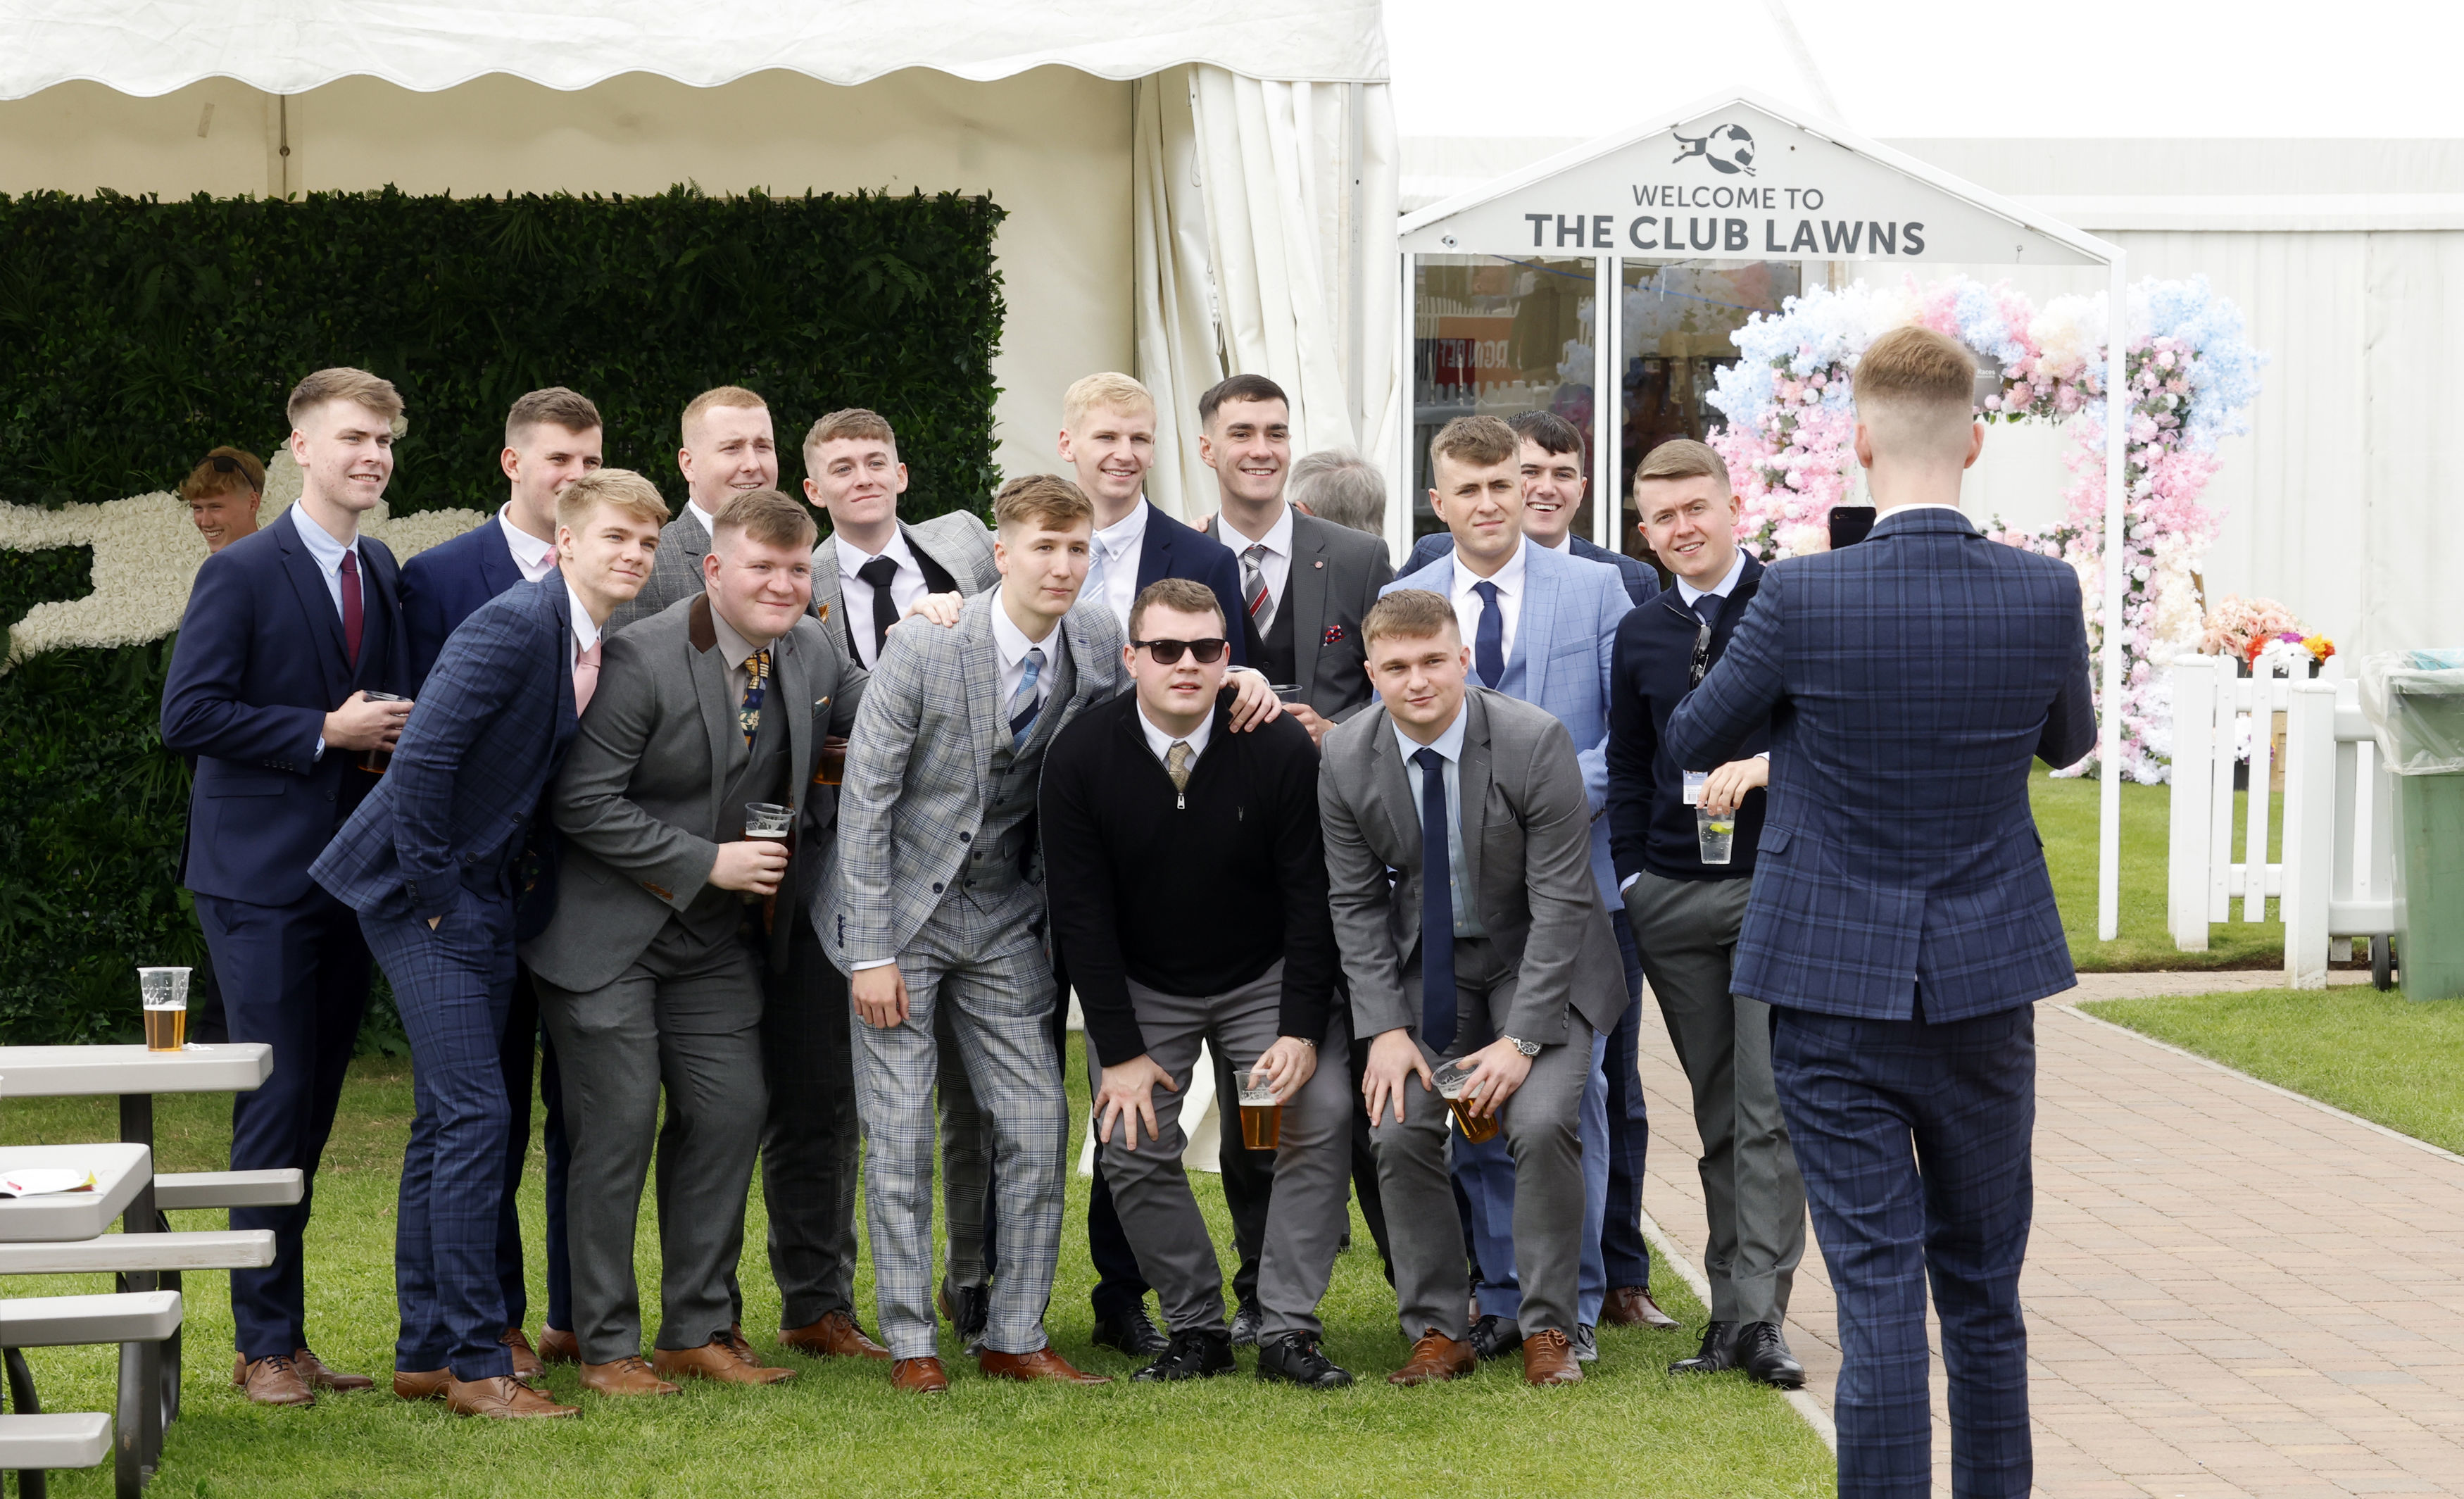 , Glam racegoers flood into Ayr racecourse as punters make most of sunny weather with daring outfits